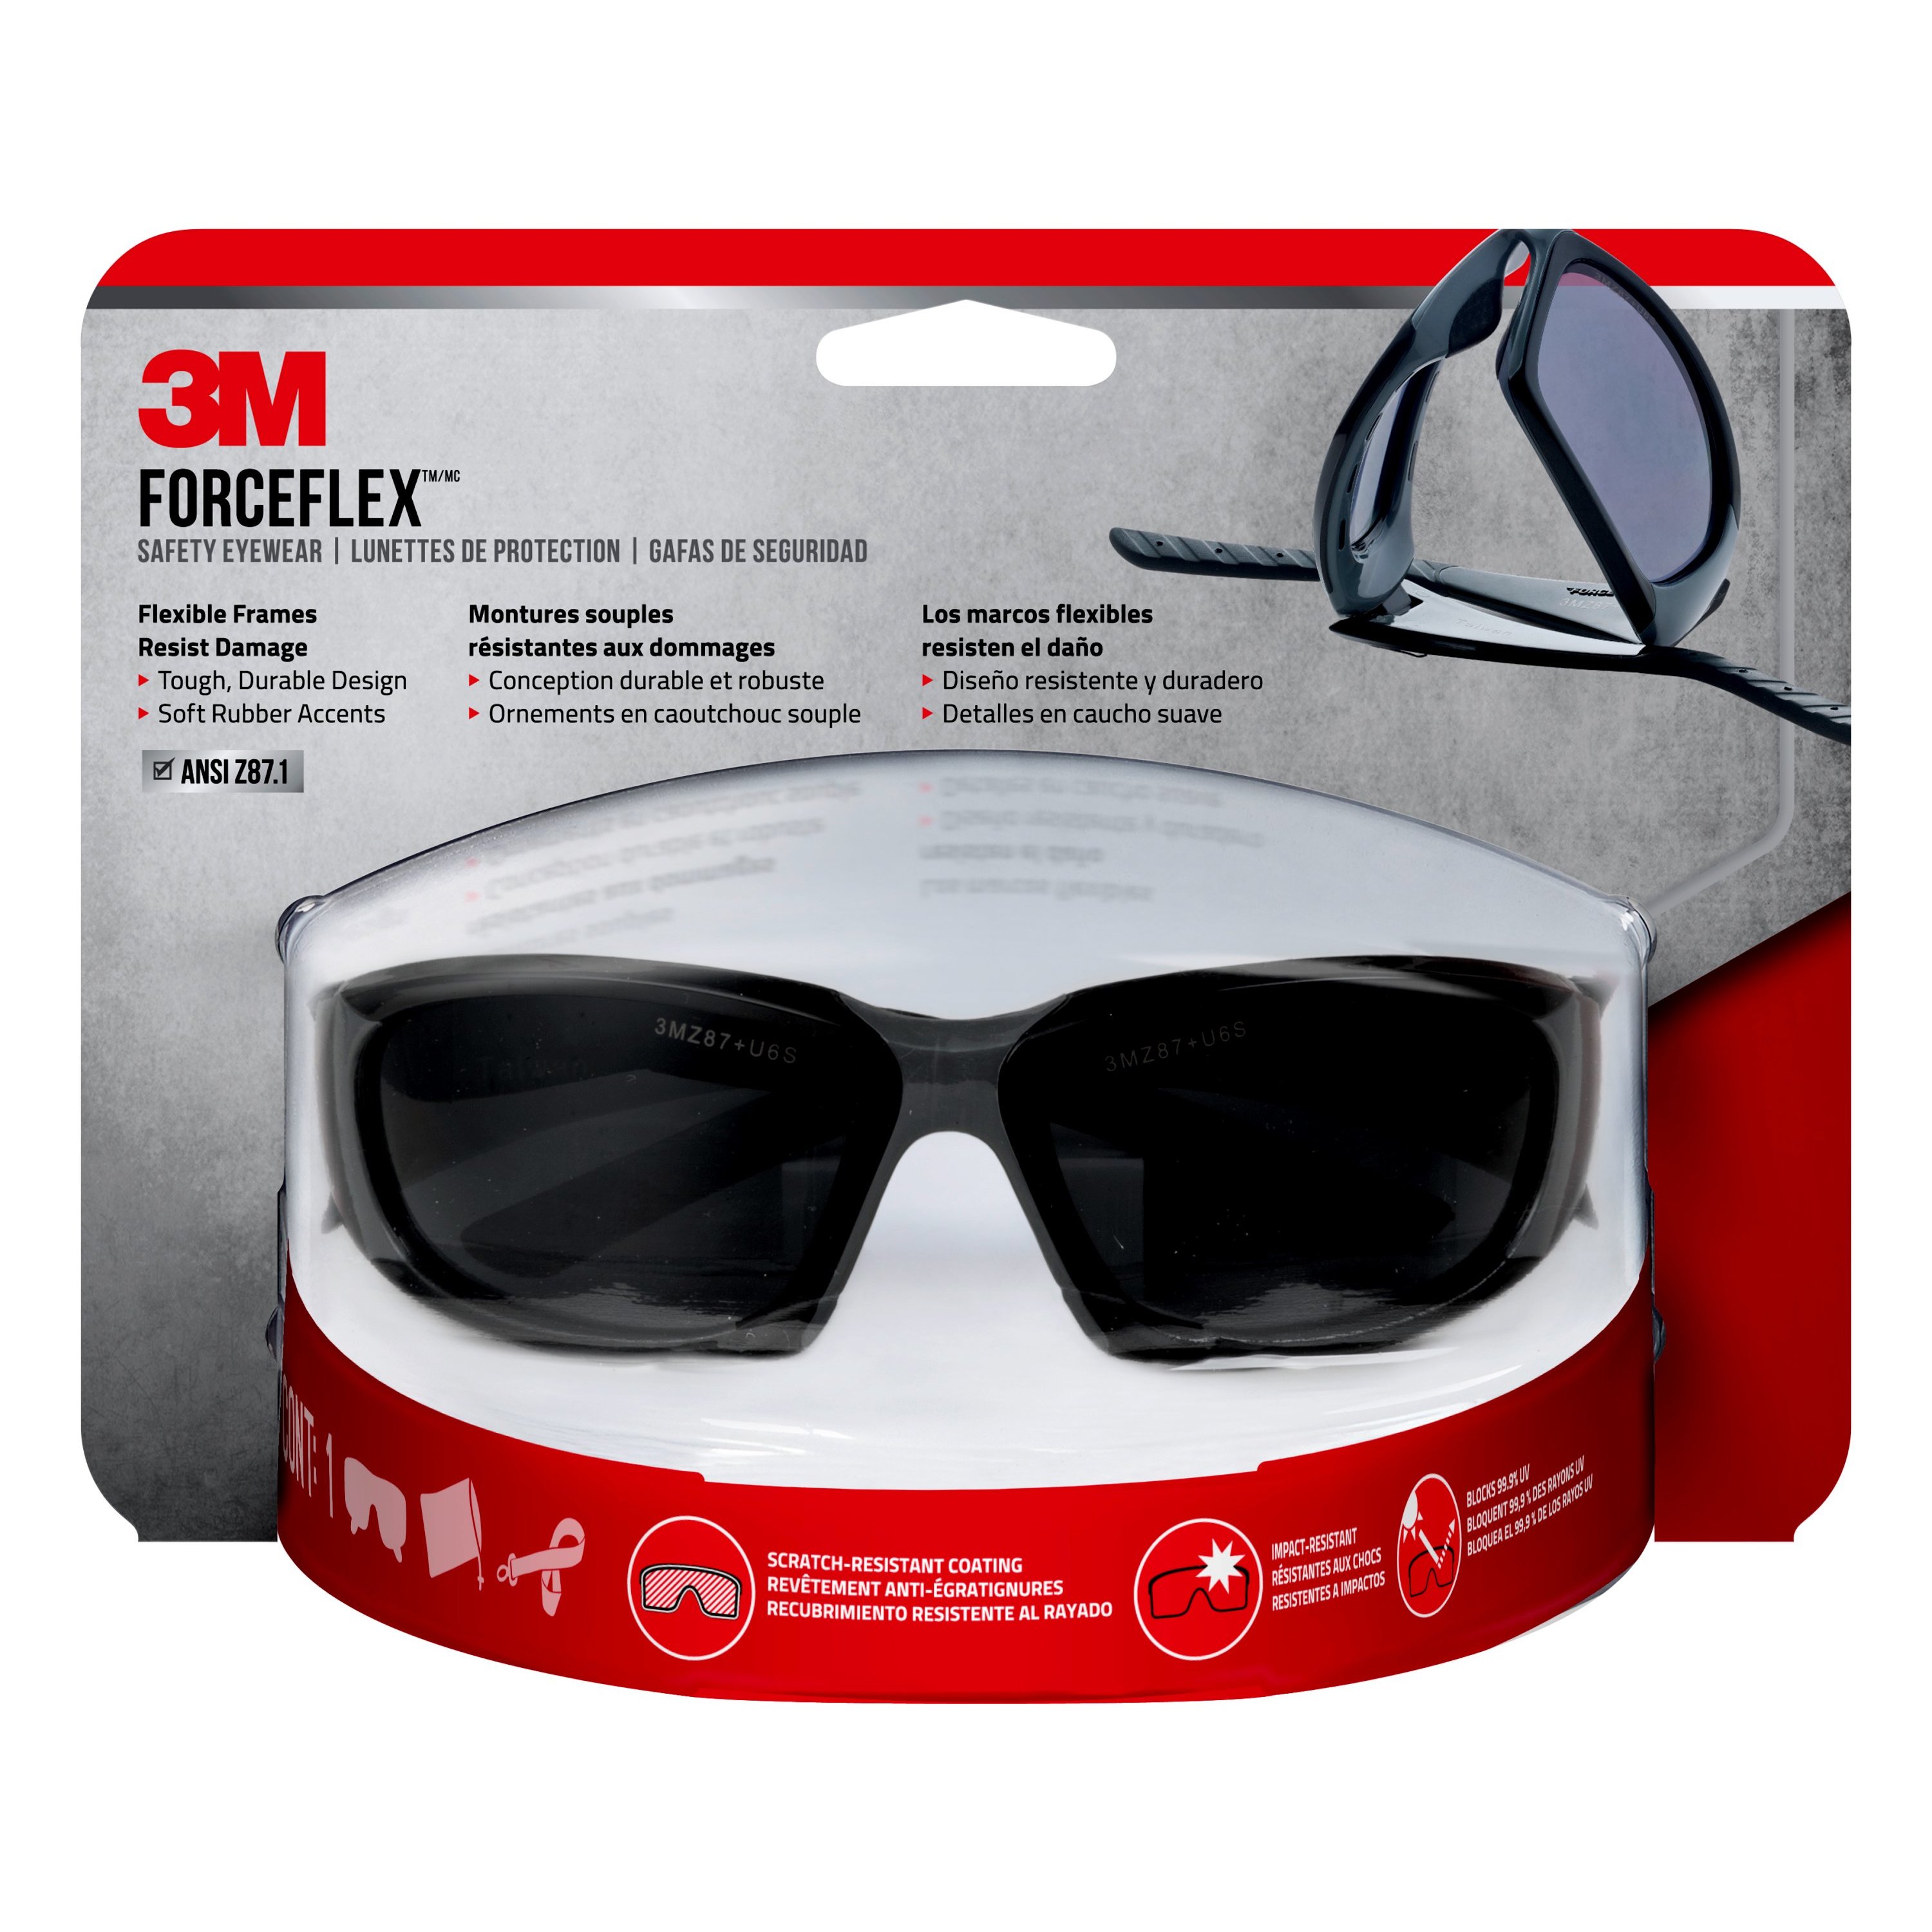 3M ForceFlex Plus Plastic Safety Glasses in the Eye Protection